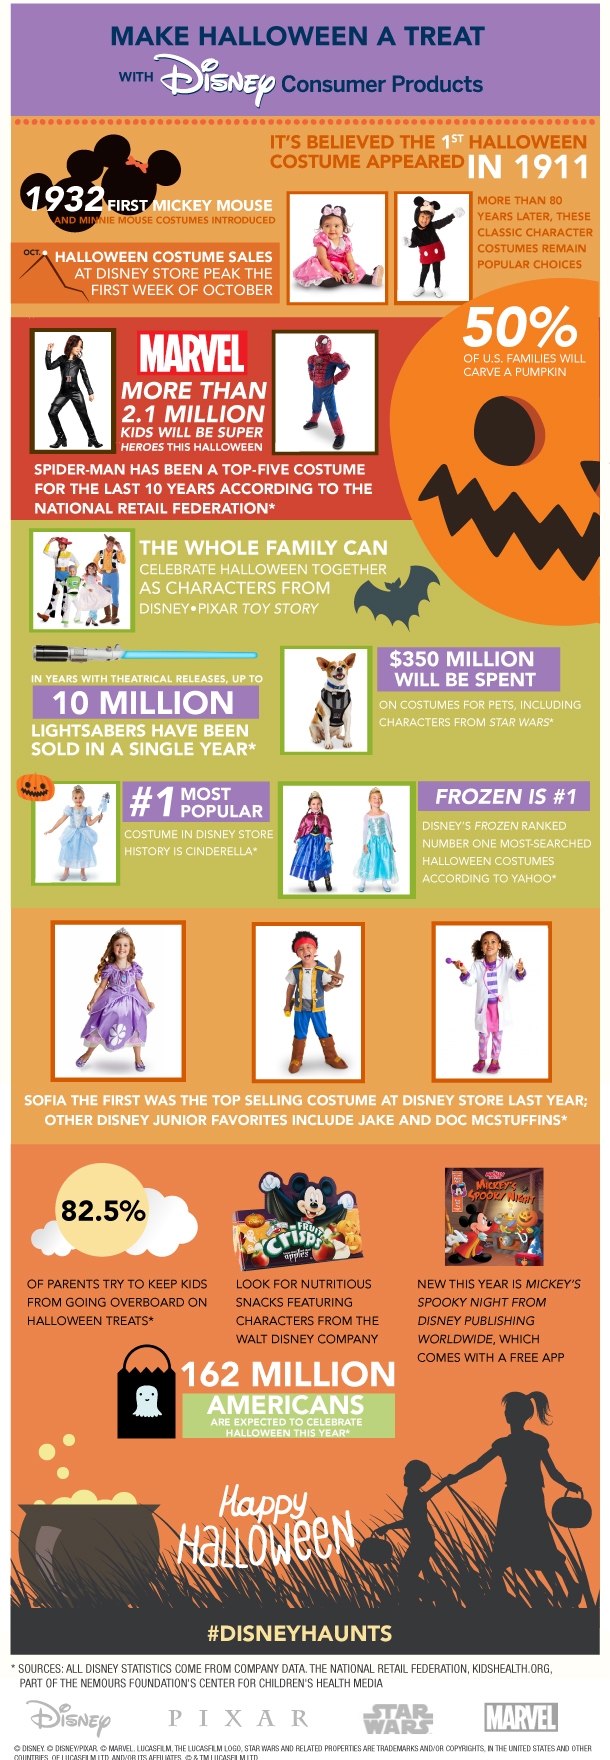 Disney Consumer Products Unveils Halloween Trends and Fun Facts Through ...